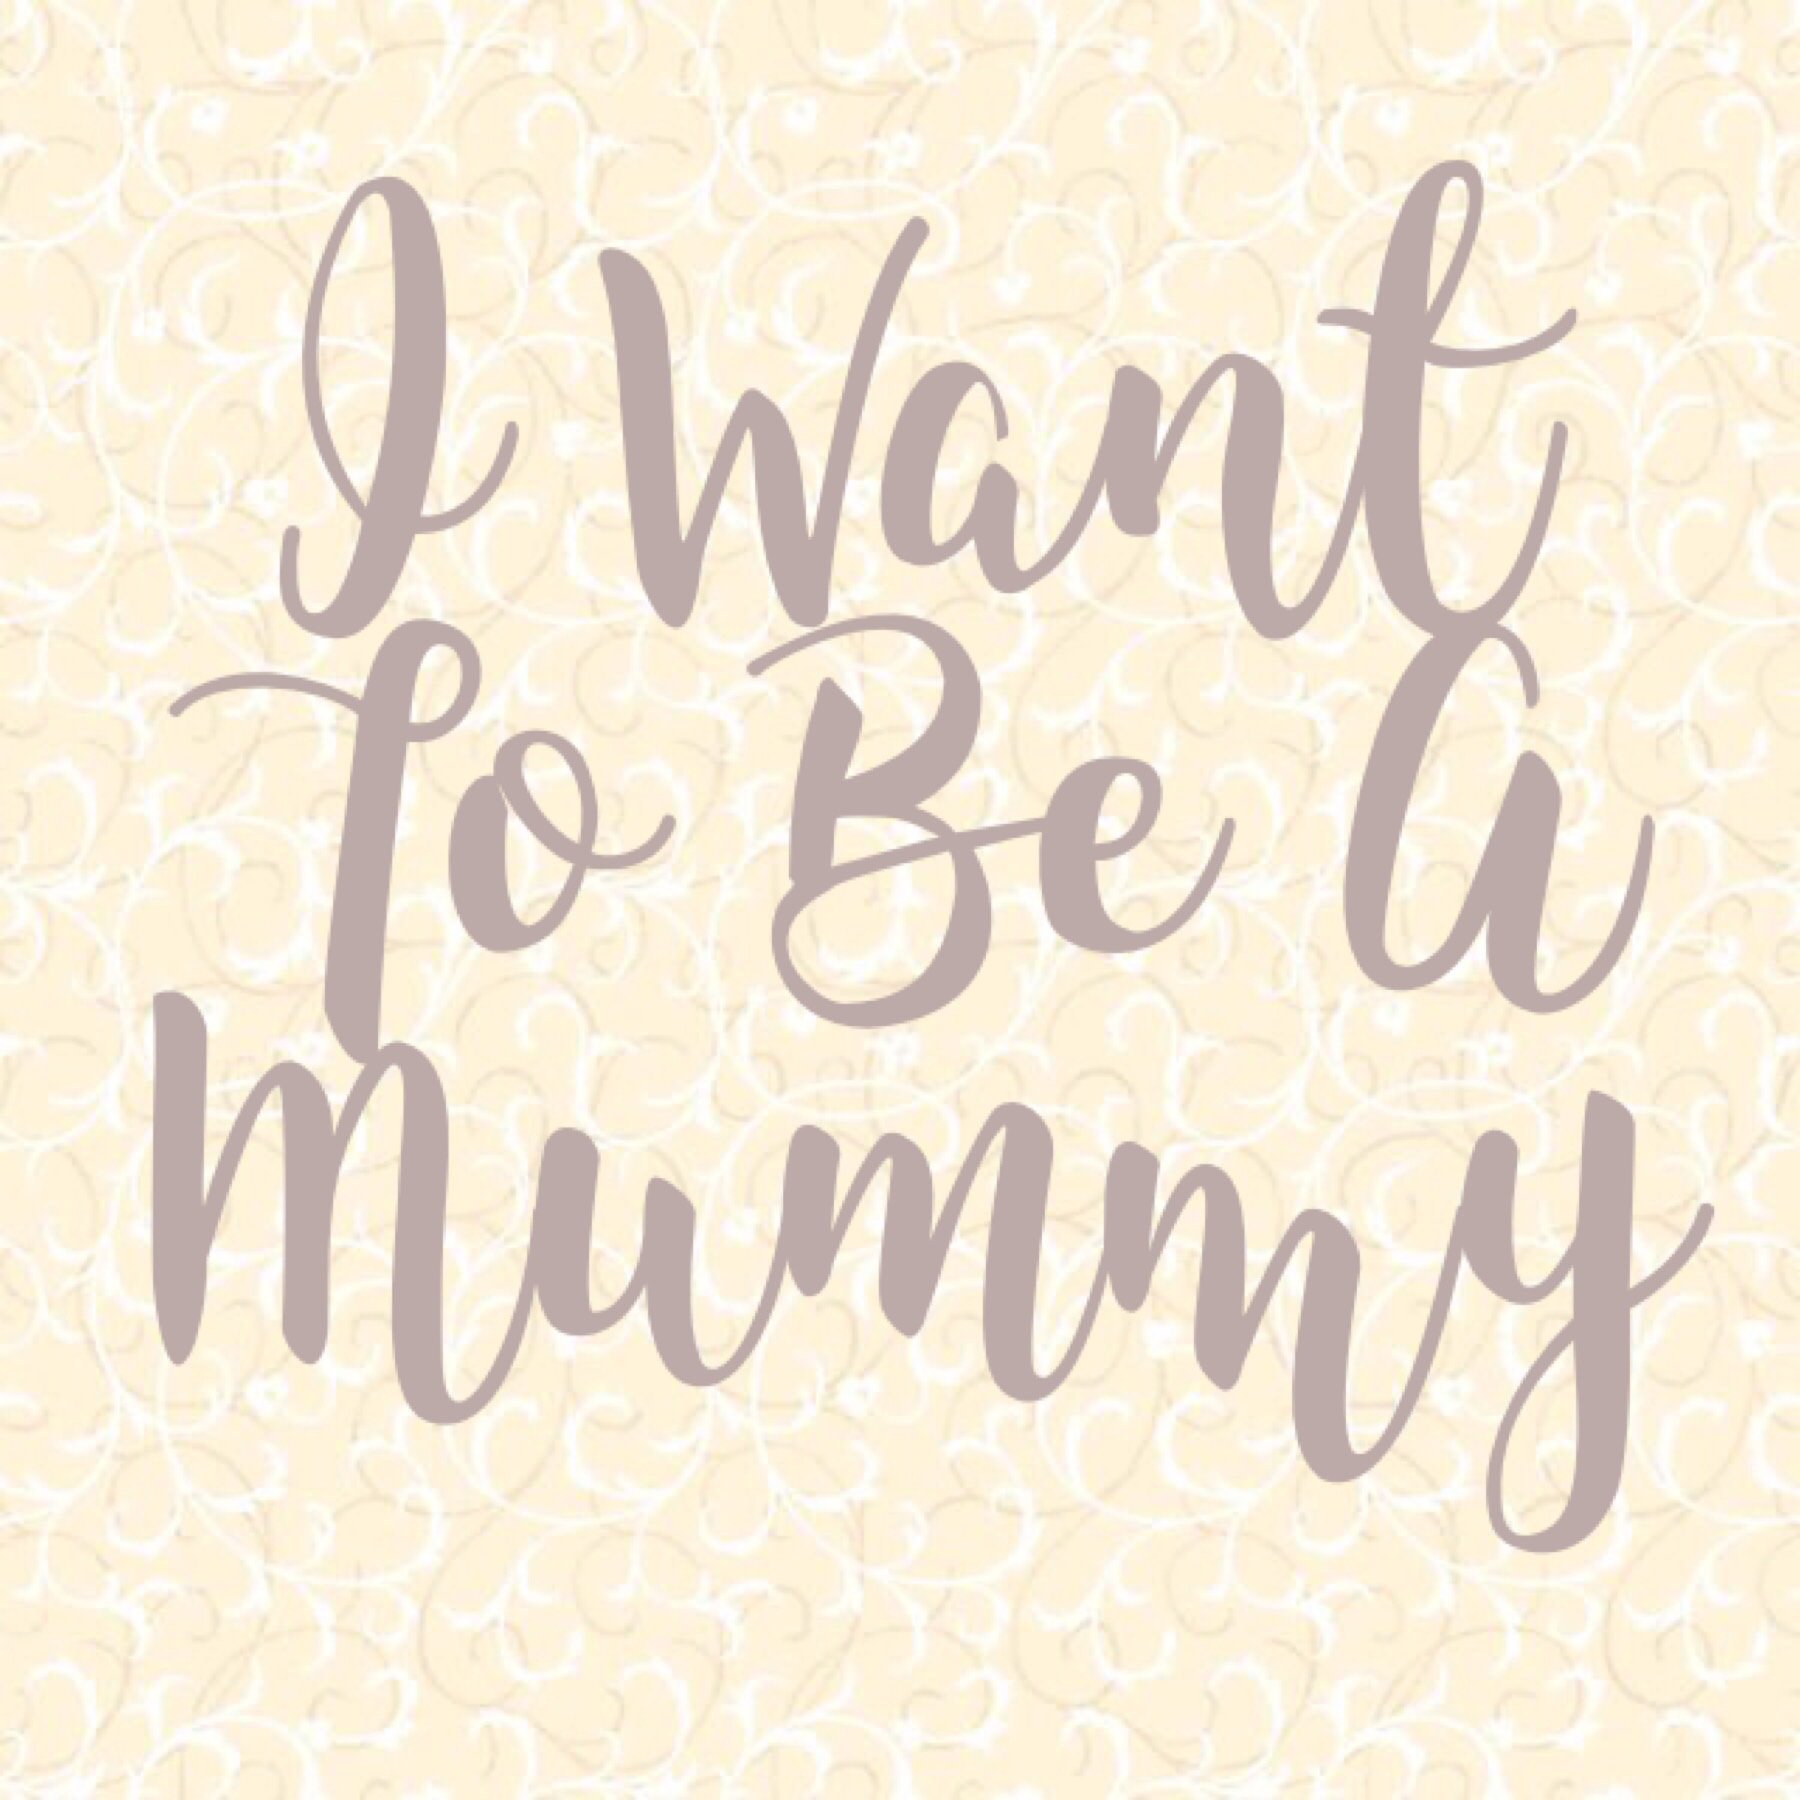 Trying to recover from a miscarriage and still dream of becoming a Mummy. To keep a positive mindset, healthy eating full of fertility foods are the way forward